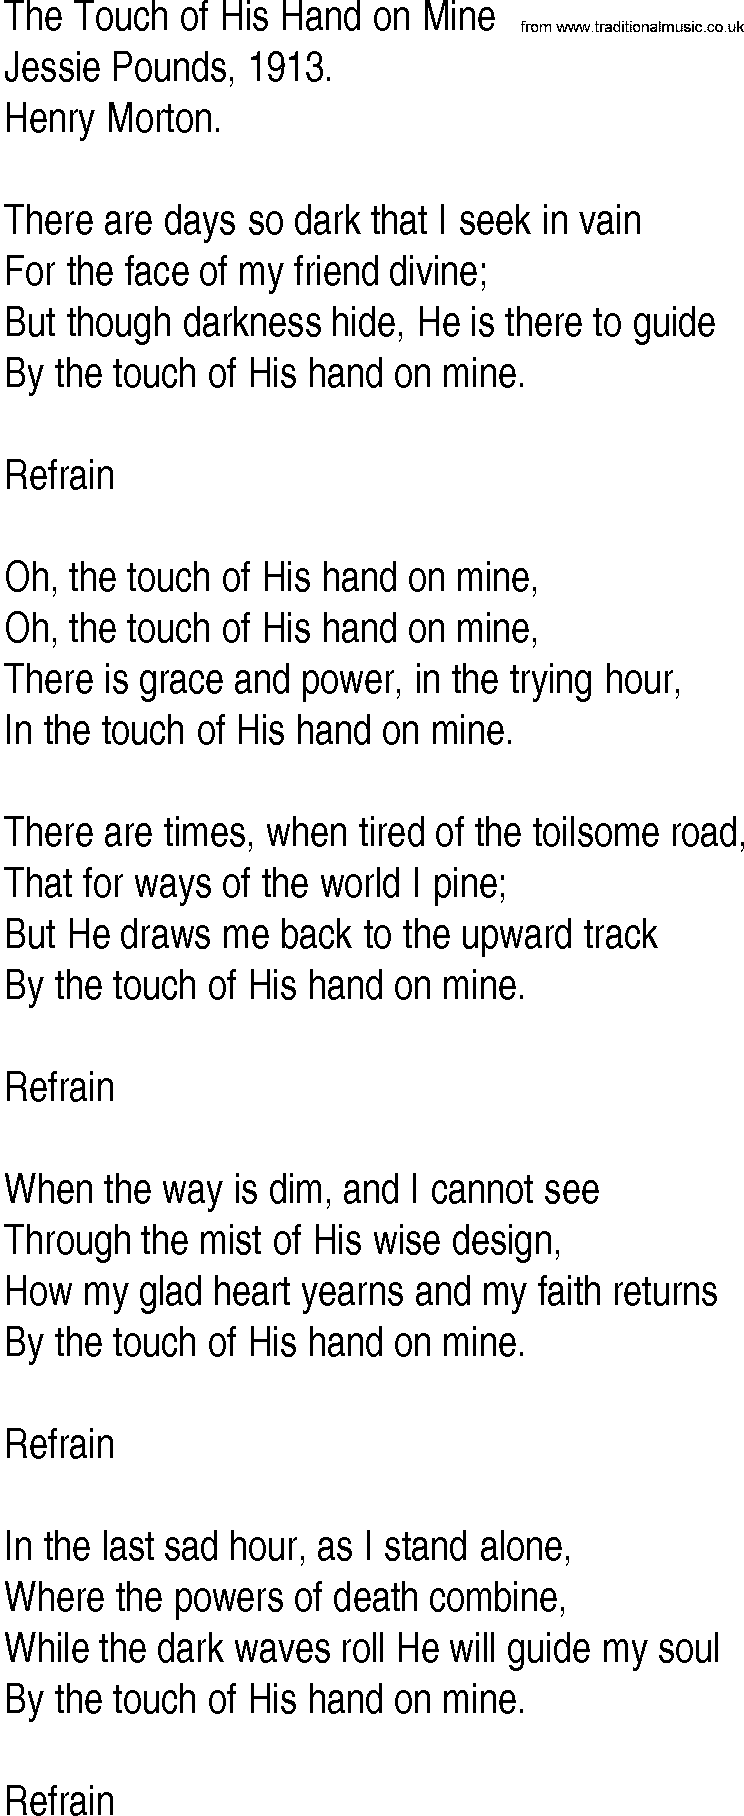 Hymn and Gospel Song: The Touch of His Hand on Mine by Jessie Pounds lyrics